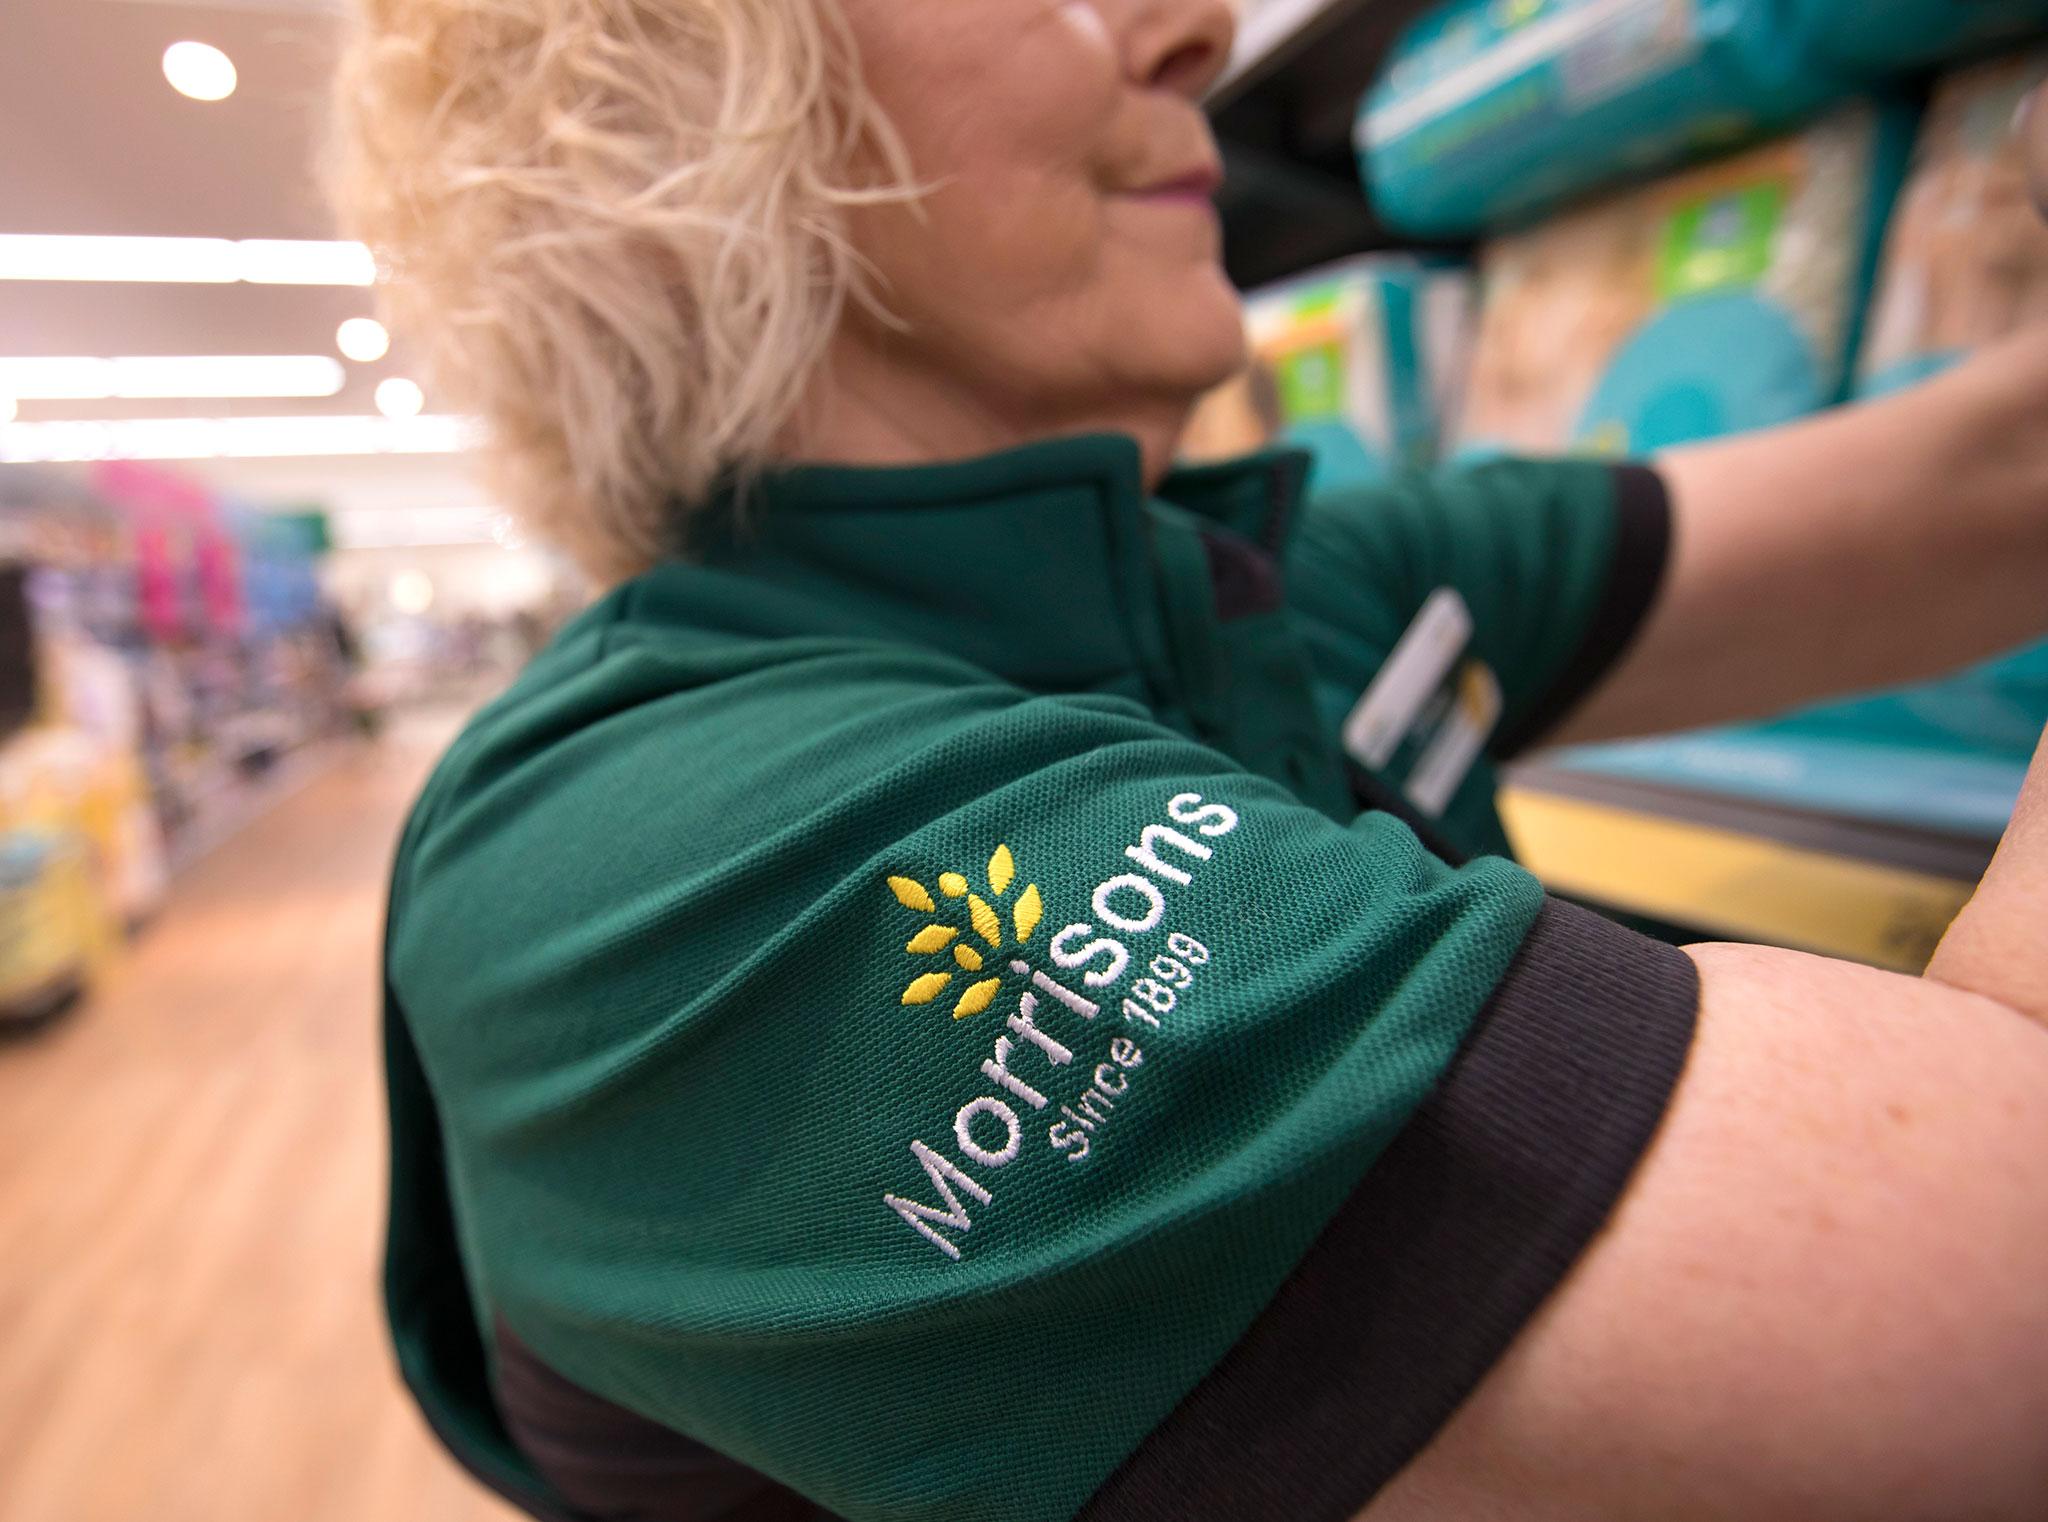 Morrisons has been stacking investors shelves high after latest numbers led to a special dividend